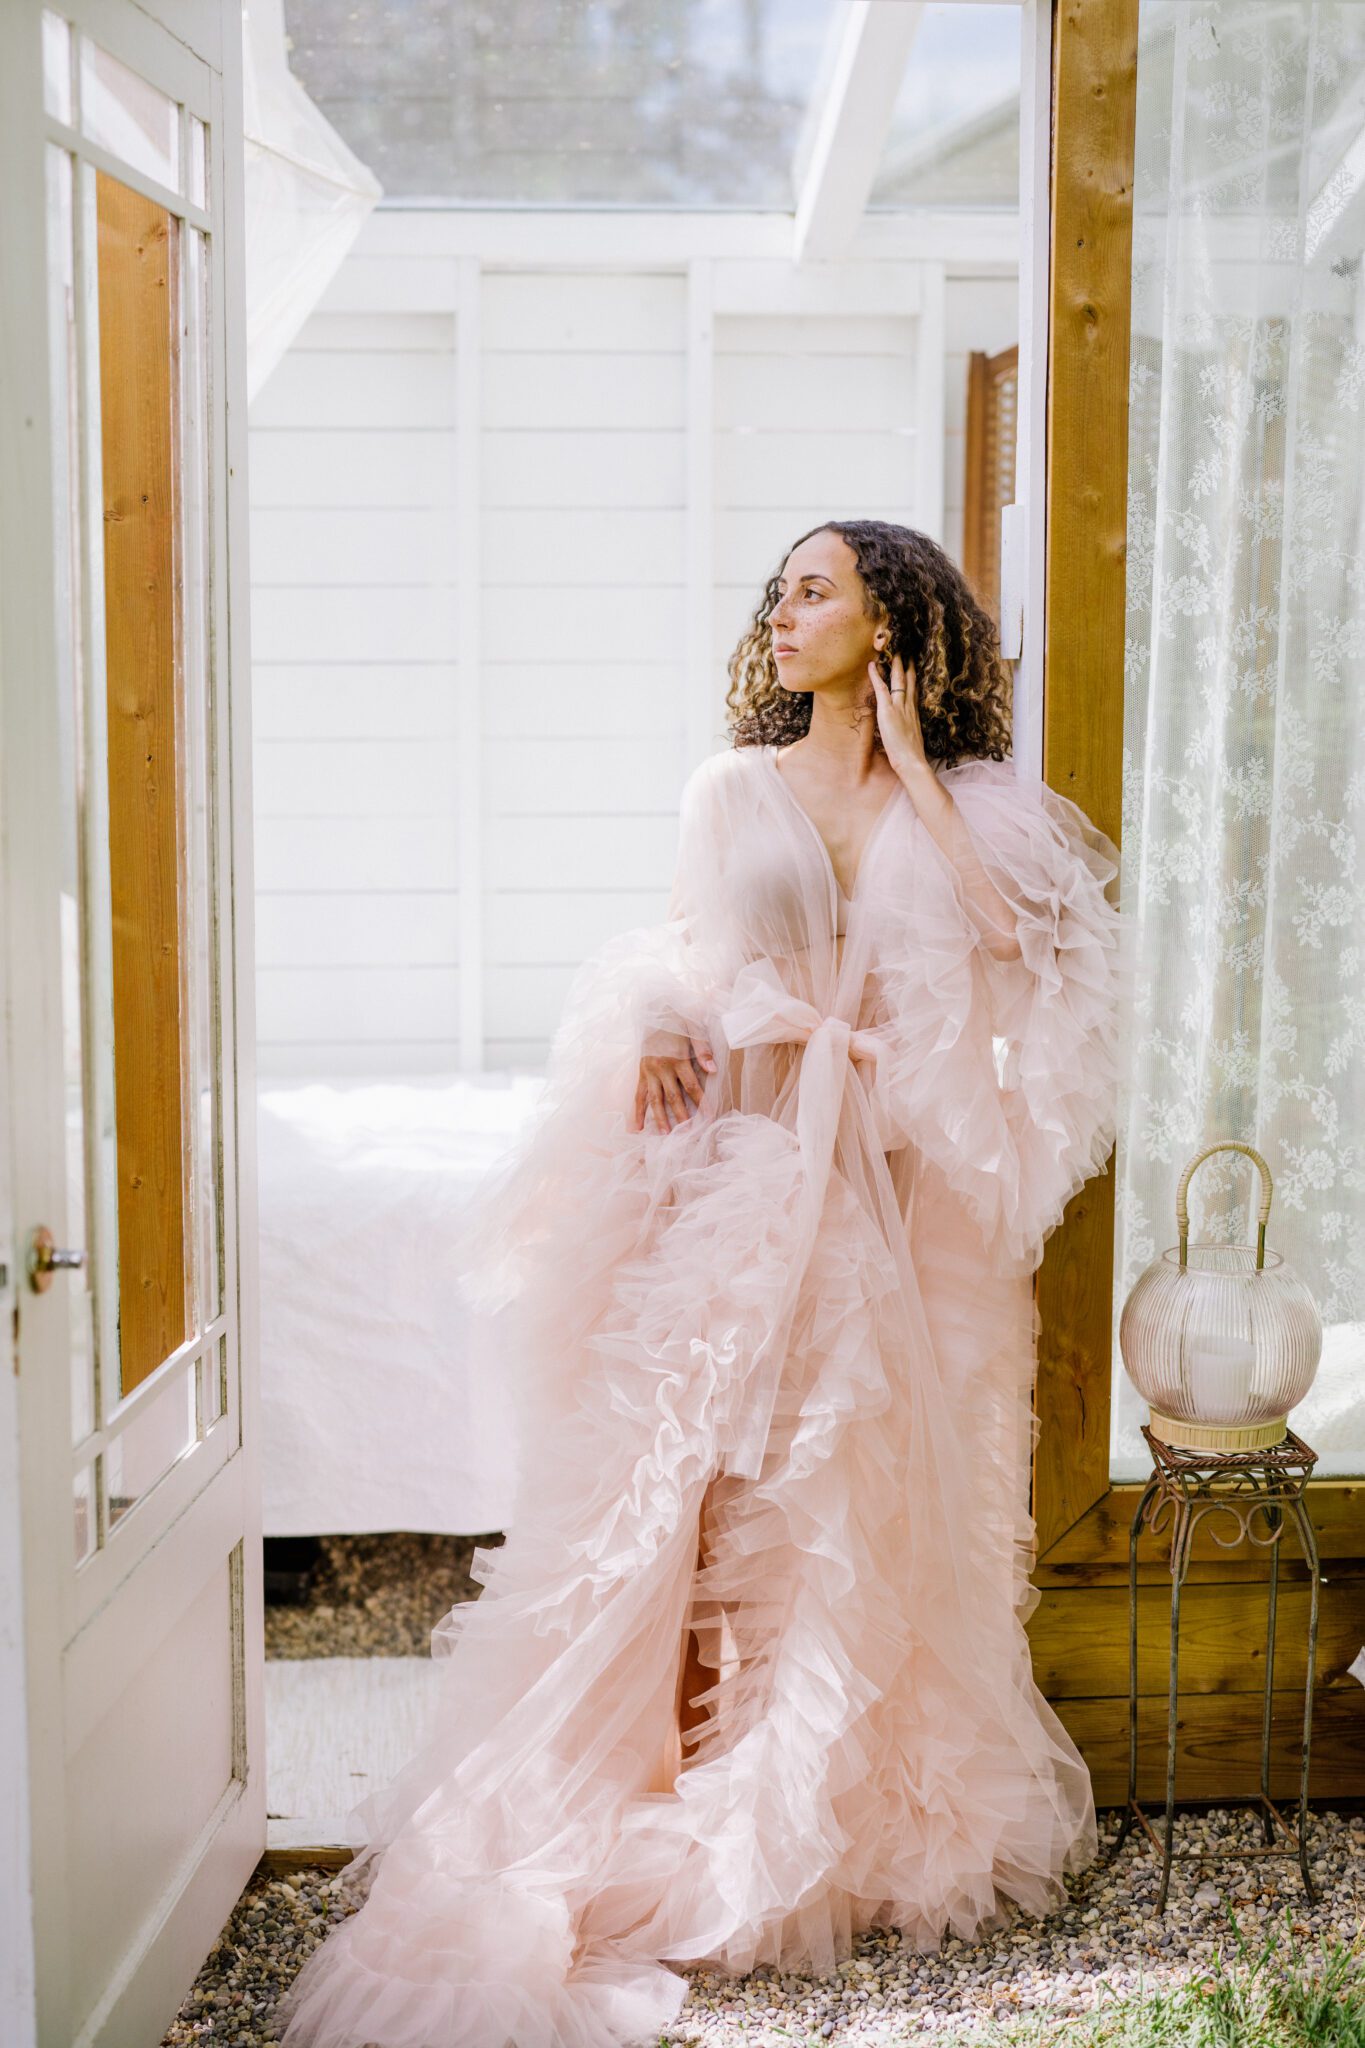 Fine art boudoir photography featuring feminine tulle blush old Hollywood ruffled robe, romantic bridal portrait by Christy D Swanberg, spring floral bridal boudoir inspiration, bridal boudoir advice